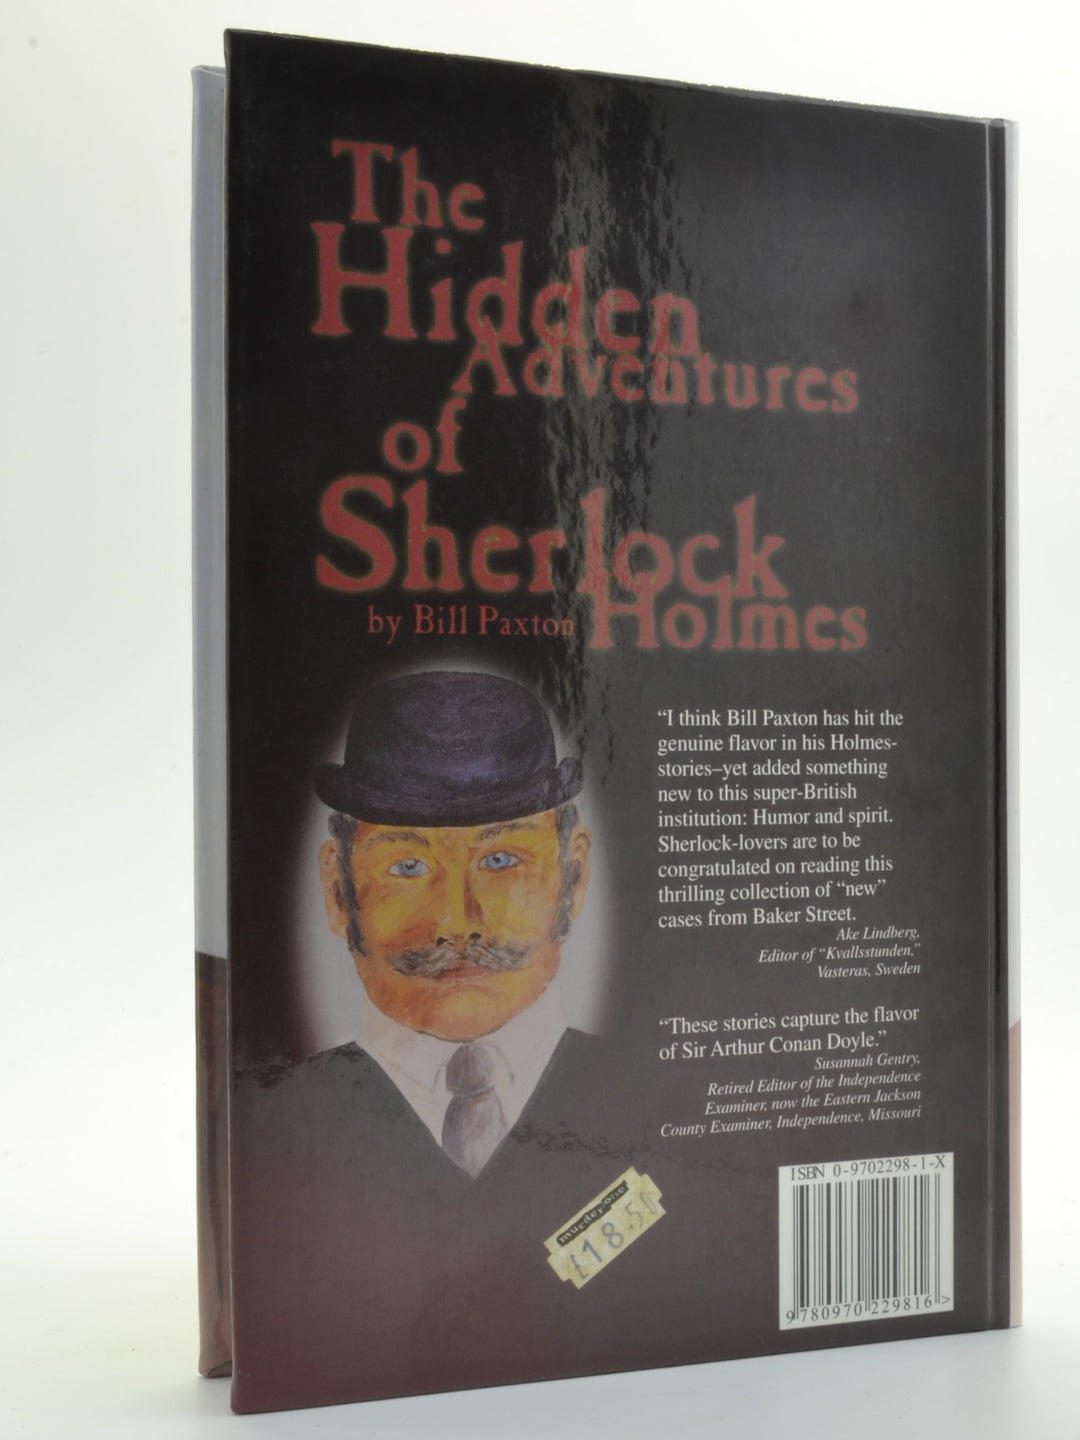 Paxton, Bill - The Hidden Adventures of Sherlock Holmes - SIGNED | pages